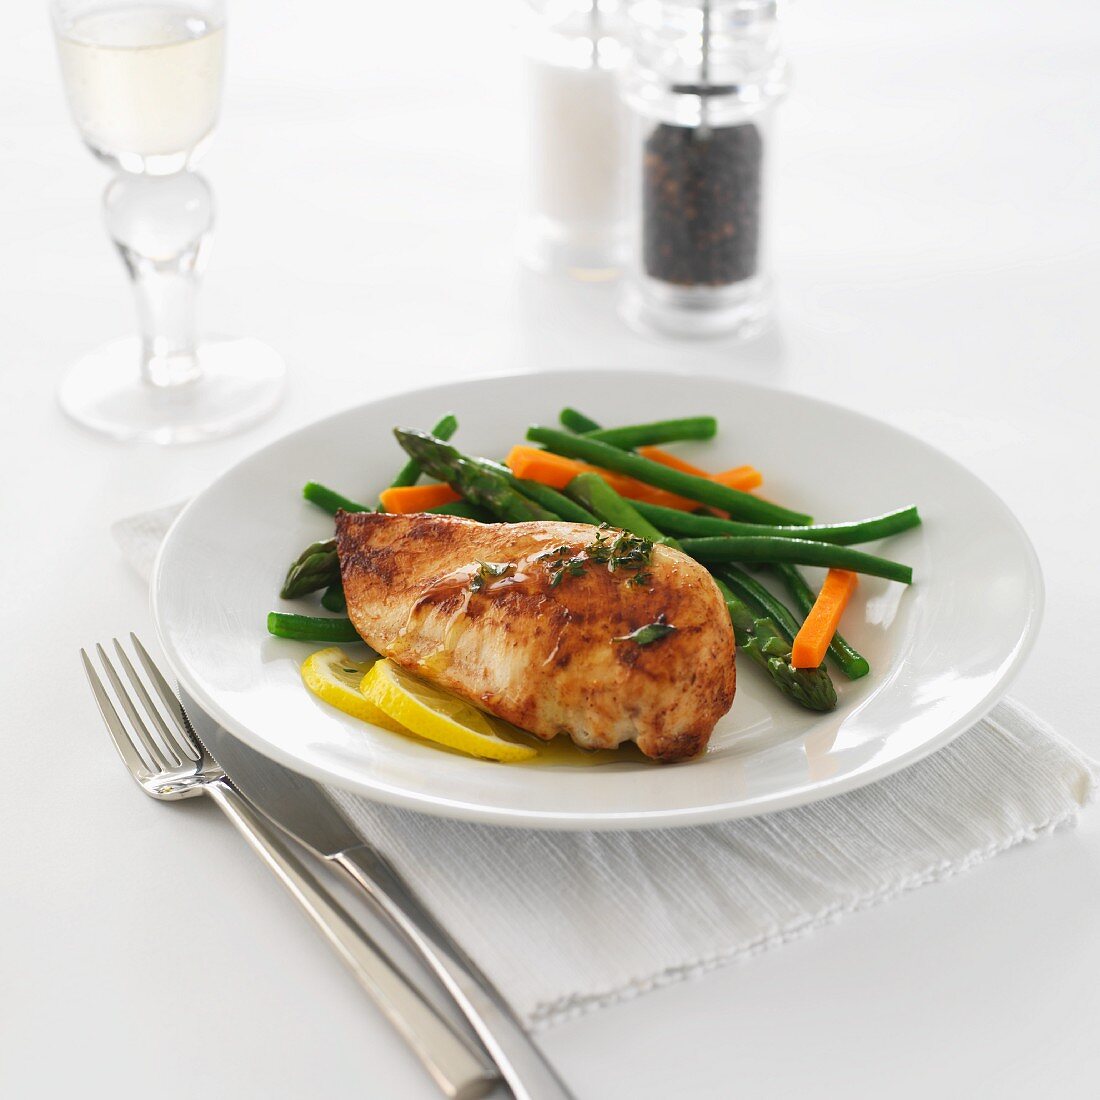 Chicken breast with lemon butter, asparagus, beans and carrots